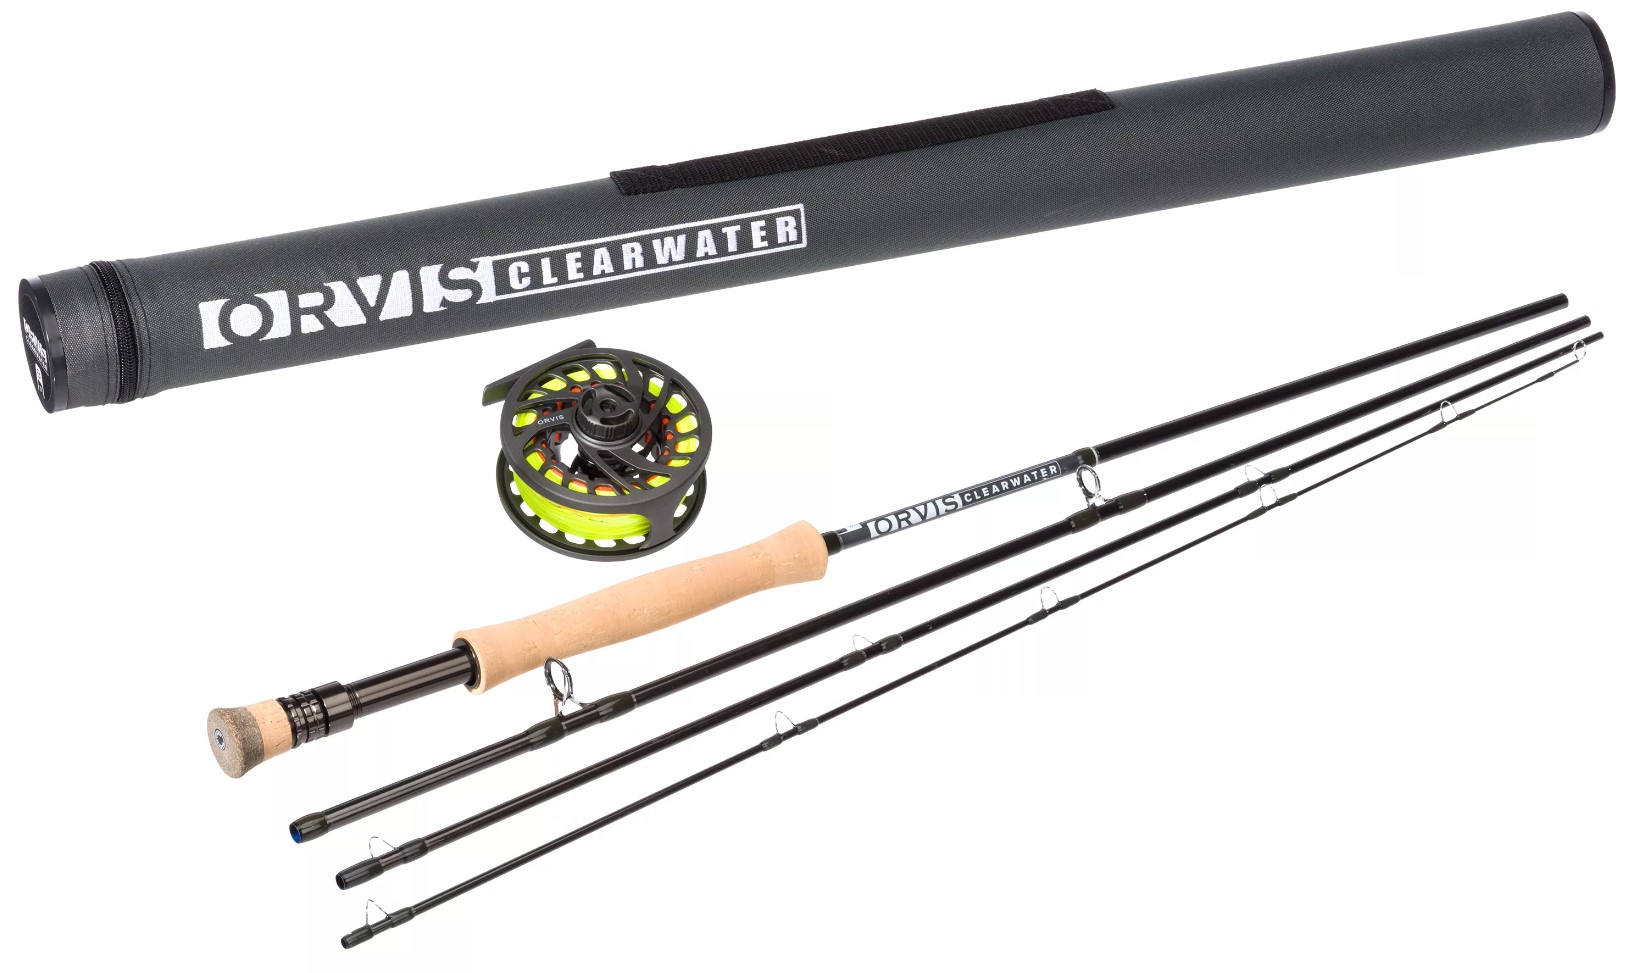 Orvis Clearwater Fly Rod Outfit 10' 3 Weight | Aussie Angler